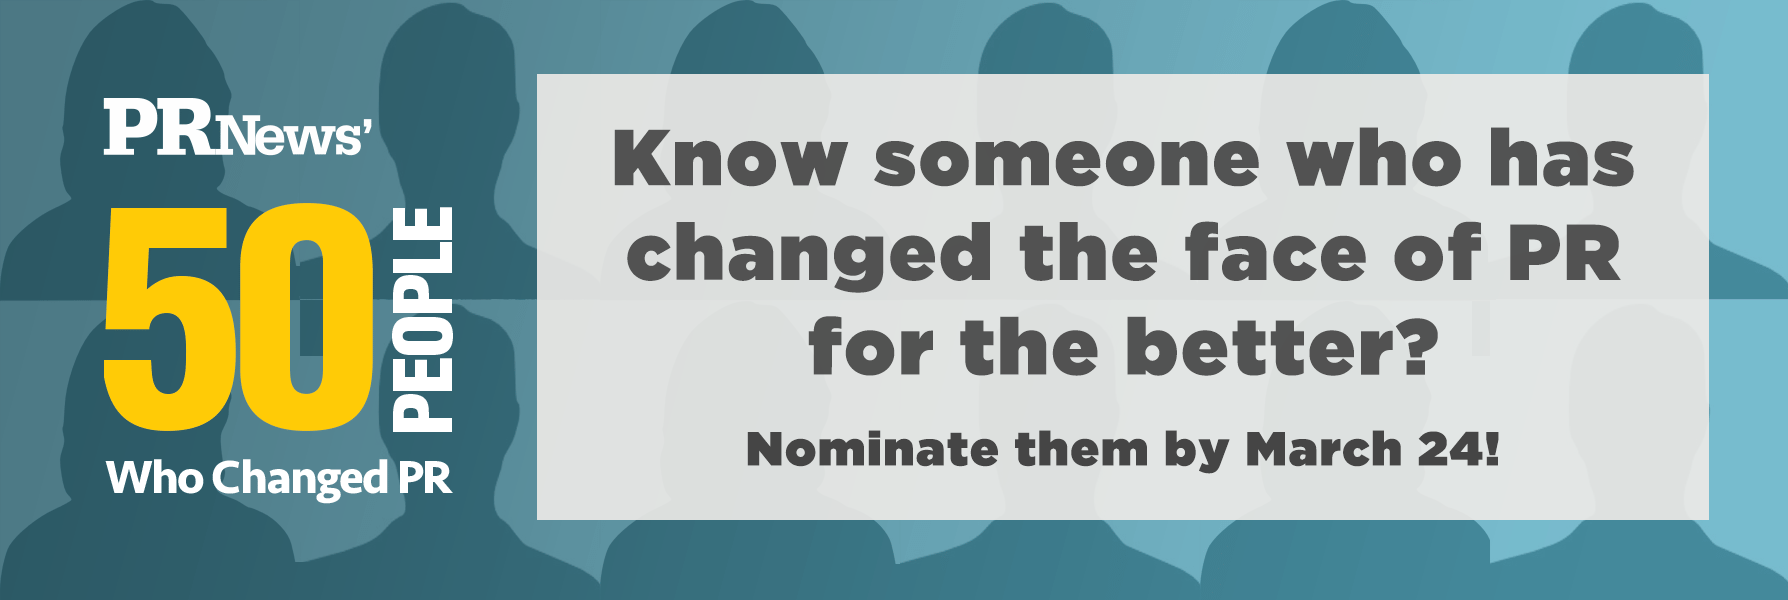 nominate someone today